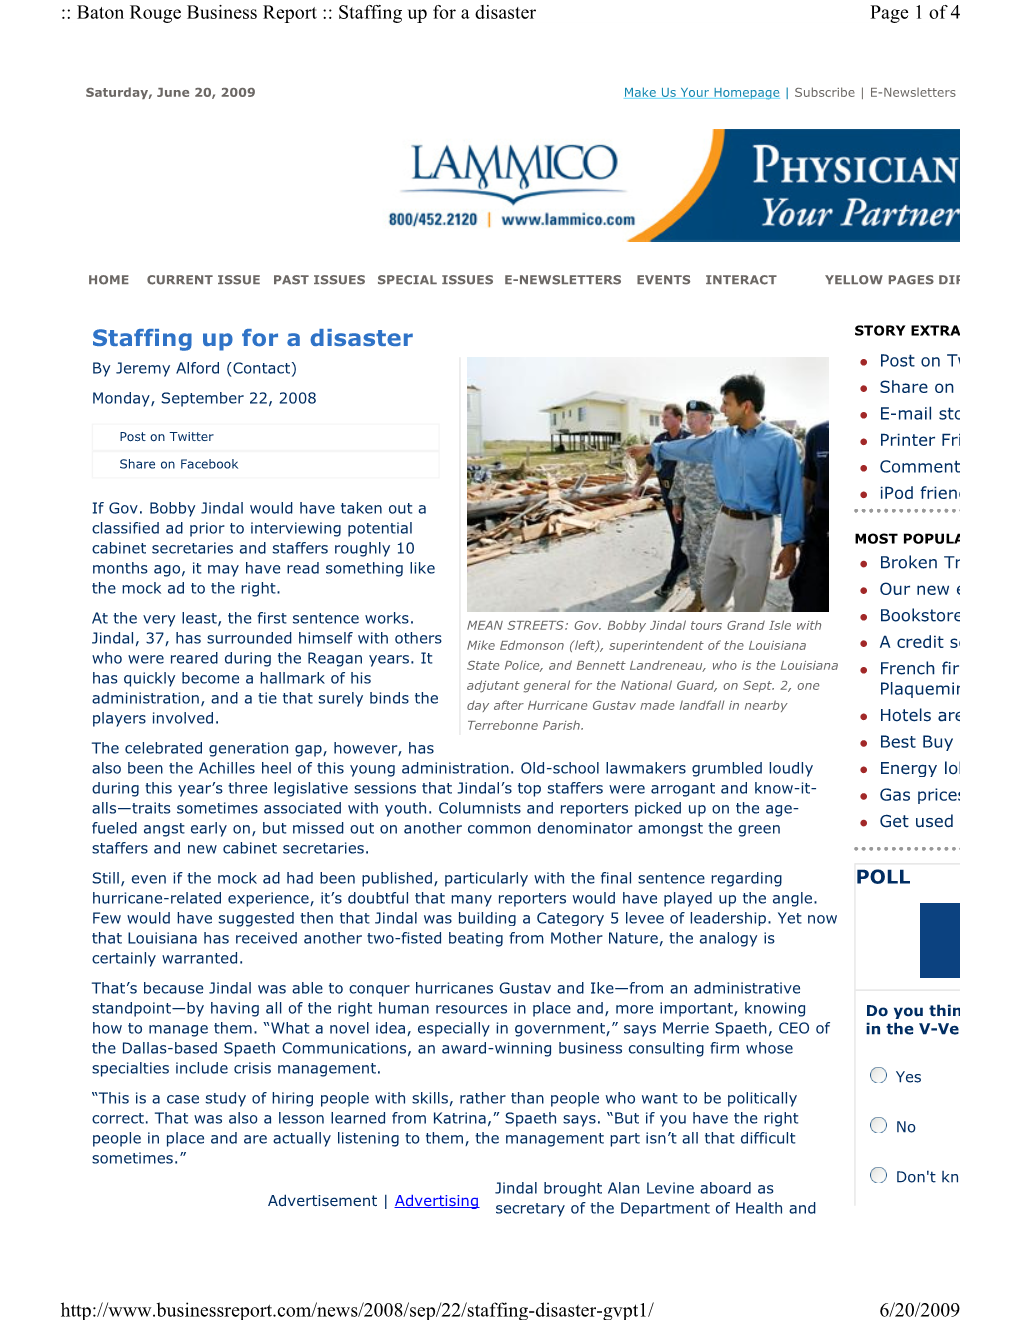 Staffing up for a Disaster Page 1 of 4